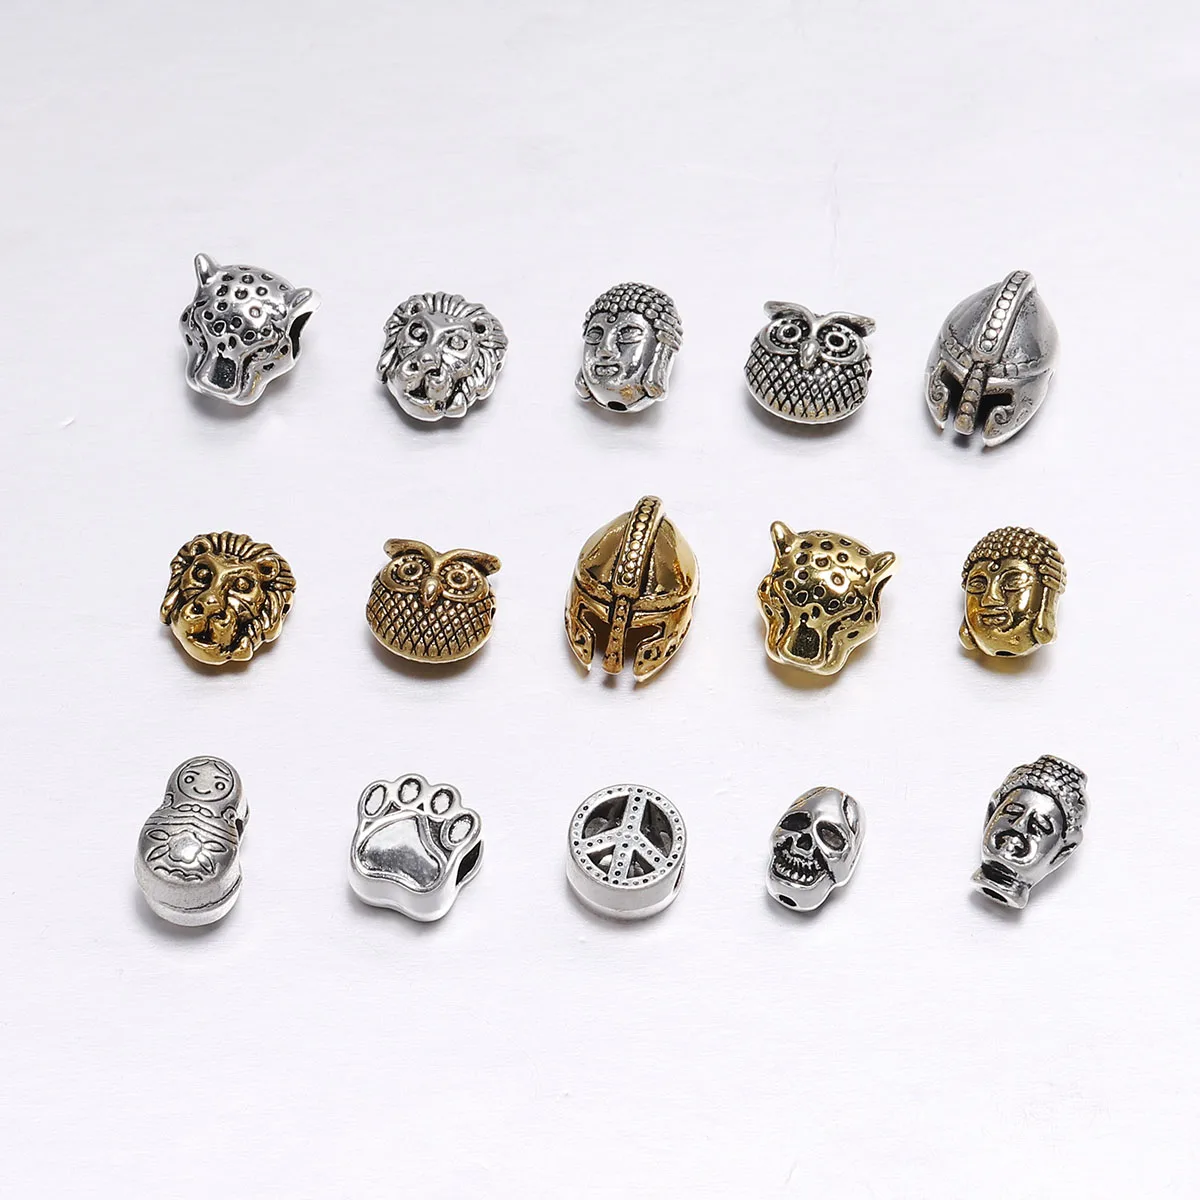 

10pcs/bag Gold Buddha Sparta leopard Lion Heads Spacer Beads For Jewelry Finding Making DIY Handmade Charm Beads Bracelet